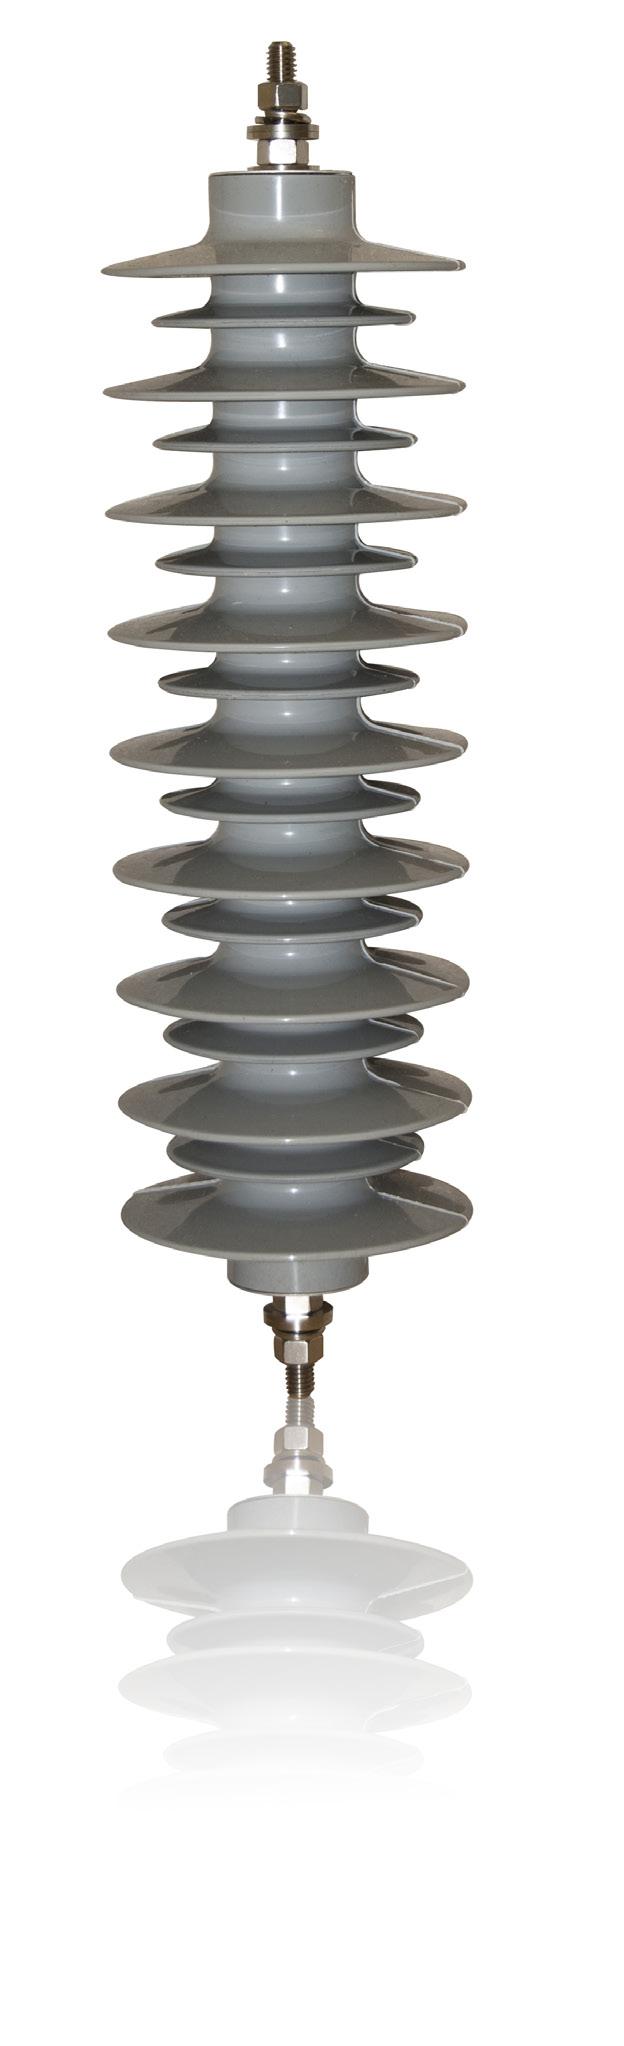 DMX-N gapless metal oxide surge arresters DMX-N surge arresters are used for the protection of switchgear, transformers and other equipment in high voltage systems from atmospheric and switching